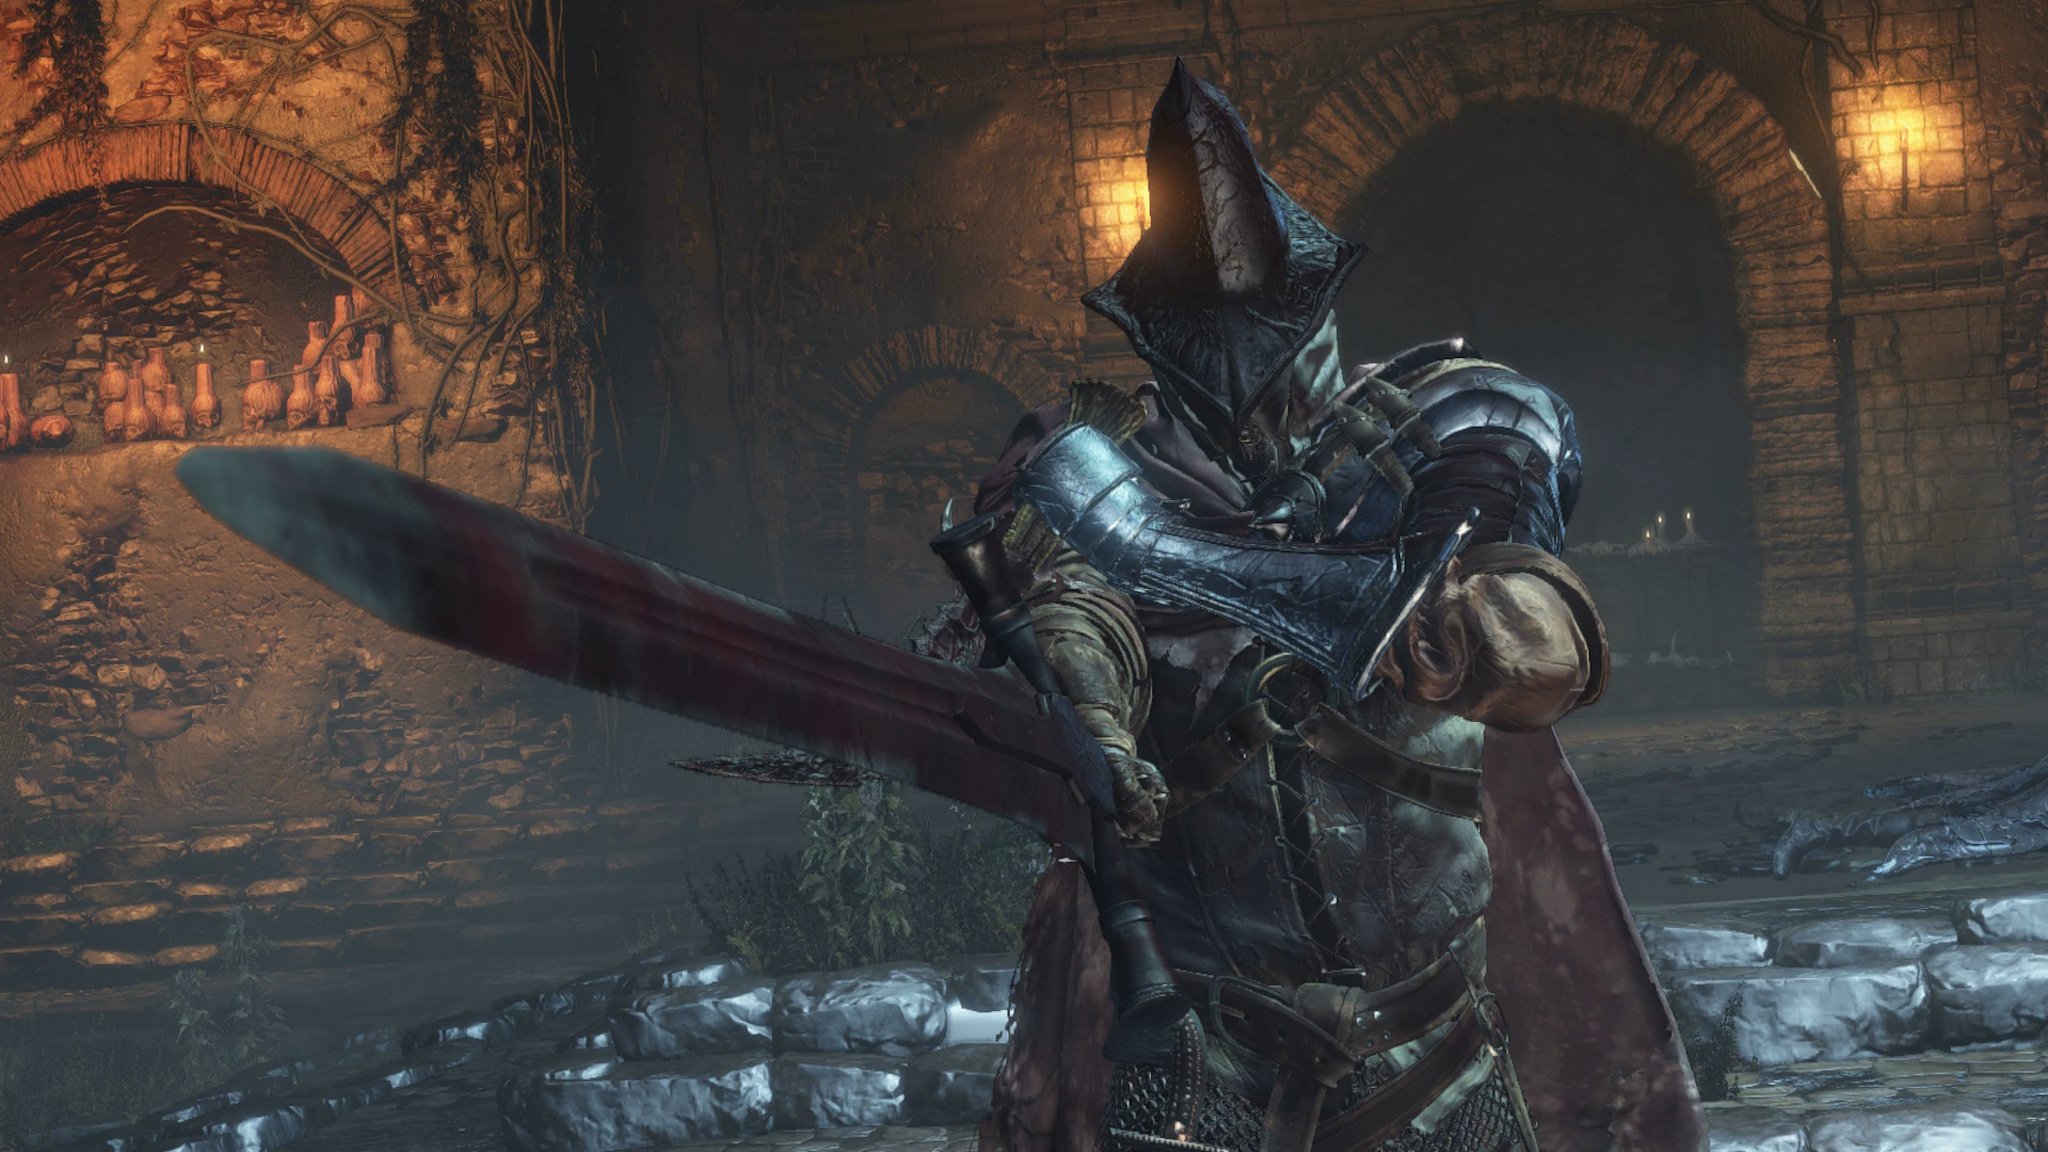 Dark Souls Iii Review A Newcomer Faces The Challenge On Xbox One